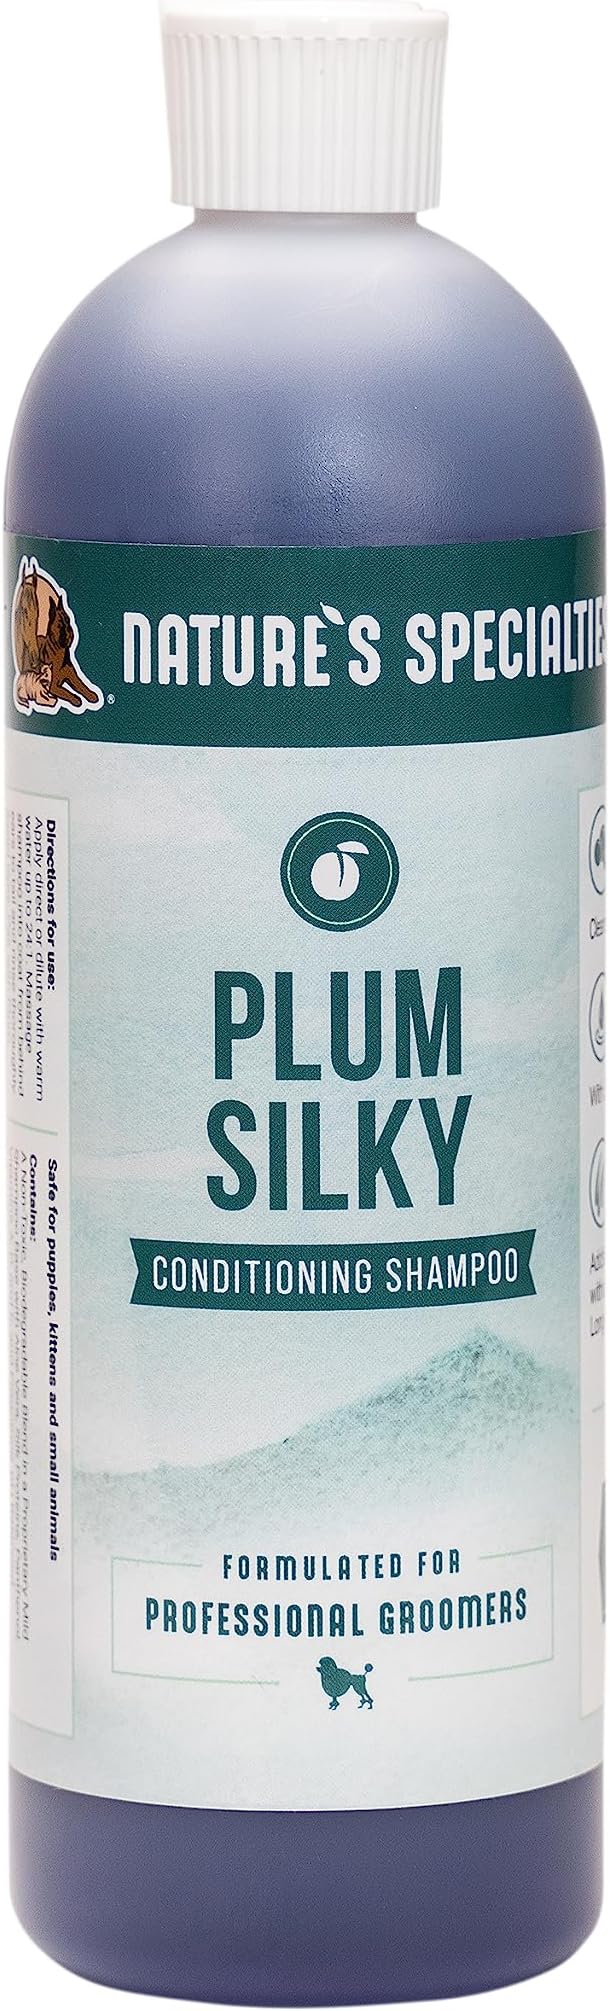 Experience the goodness of Nature's Specialties Plum Silky Conditioning Shampoo, a concentrated formula for silky smooth hair.